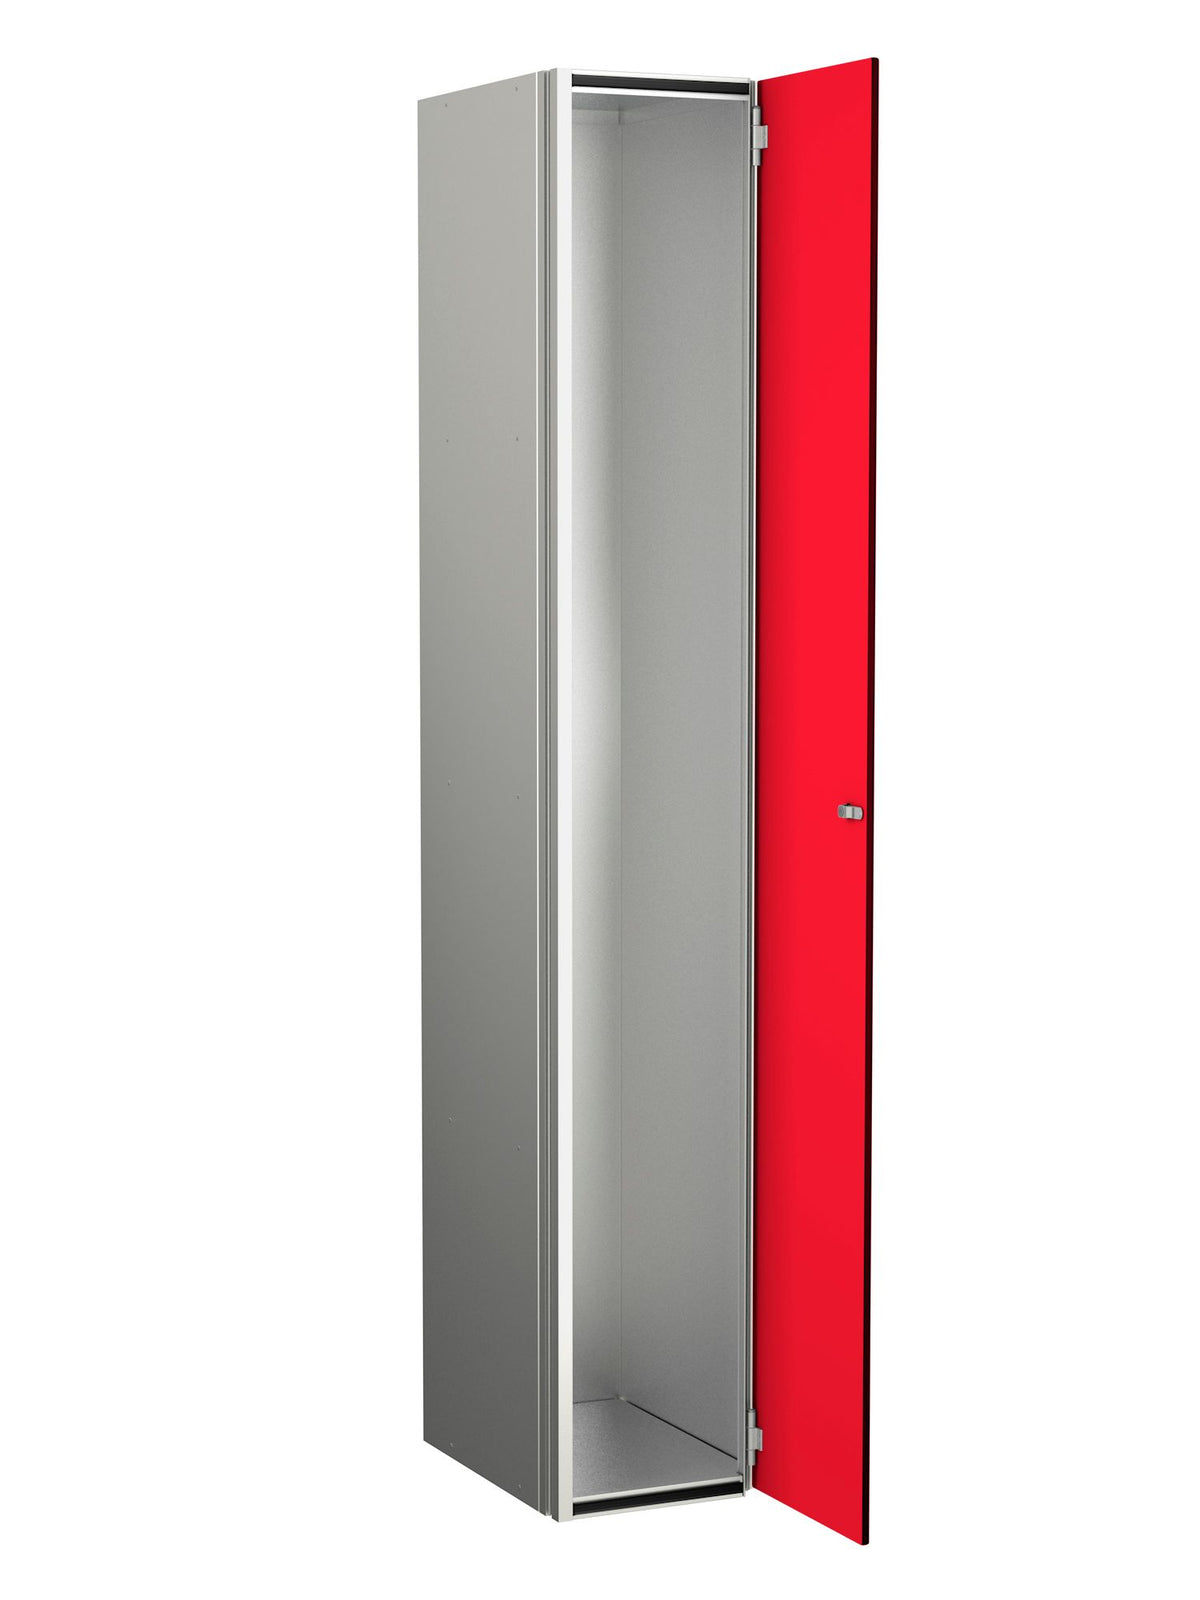 ZENBOX WET AREA LOCKERS WITH SGL DOORS - DYNASTY RED 1 DOOR Storage Lockers > Lockers > Cabinets > Storage > Probe > One Stop For Safety   